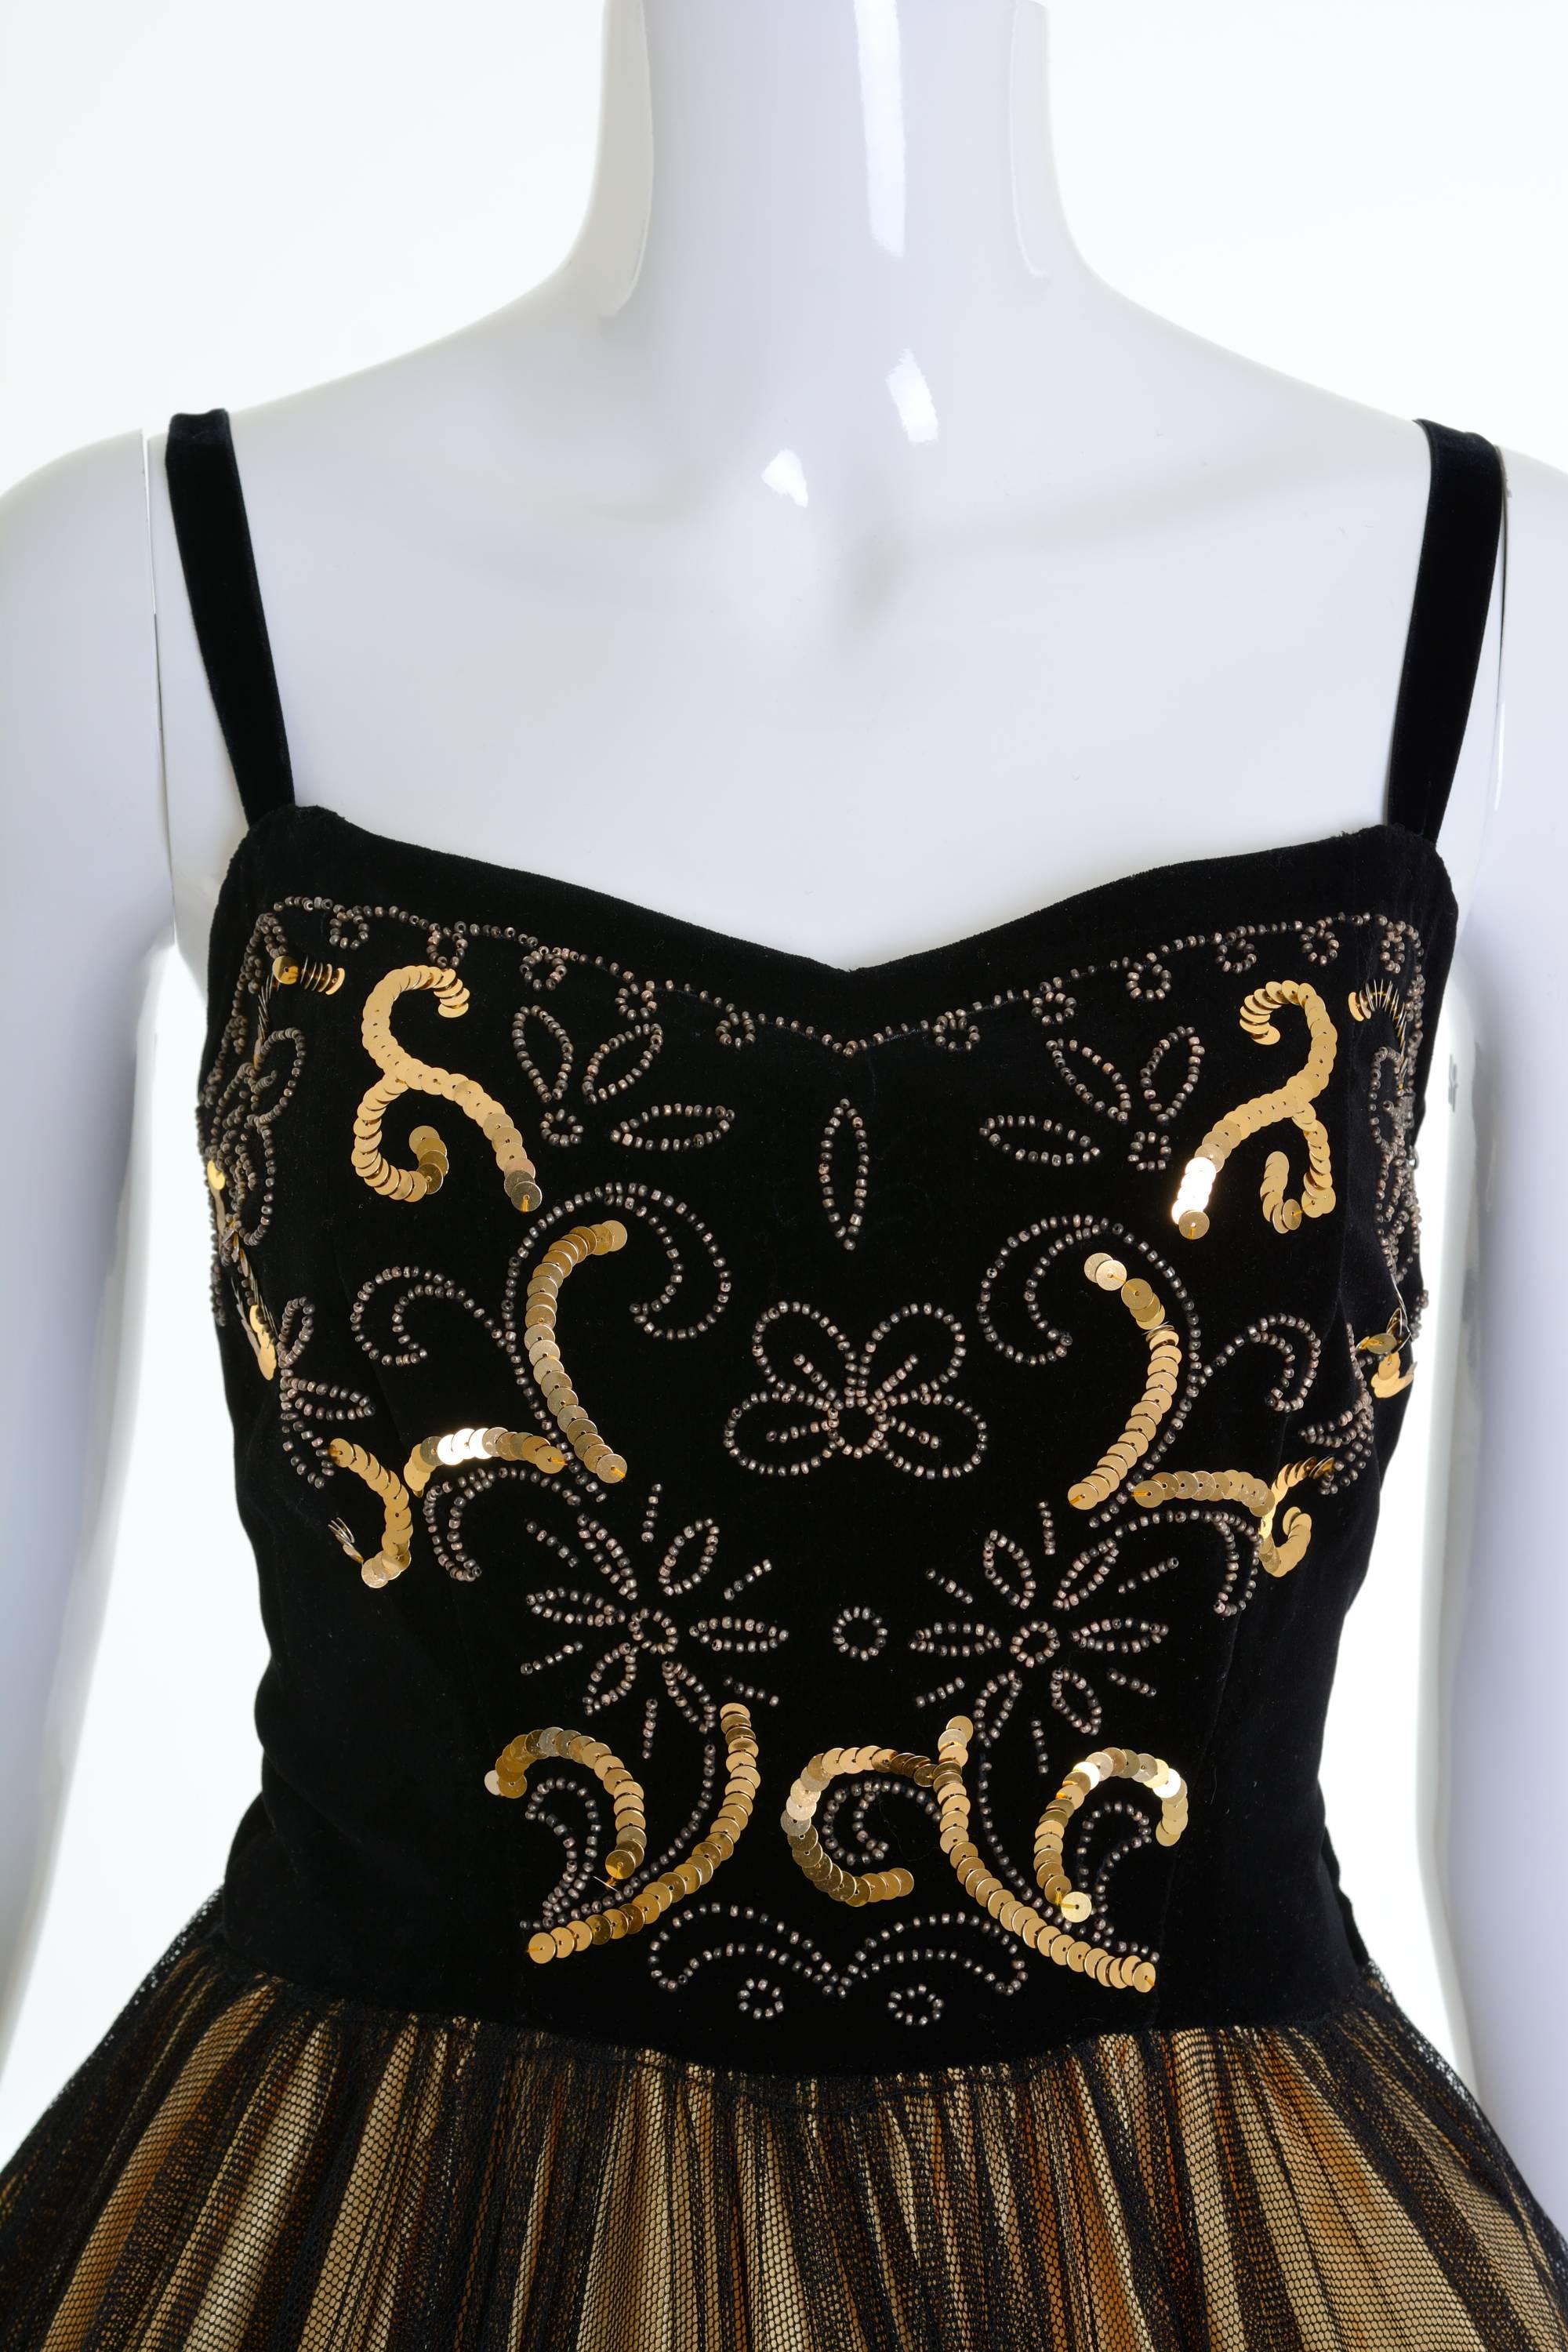 Women's 1950s Vintage Black and Gold Embroidered Cocktail Dress